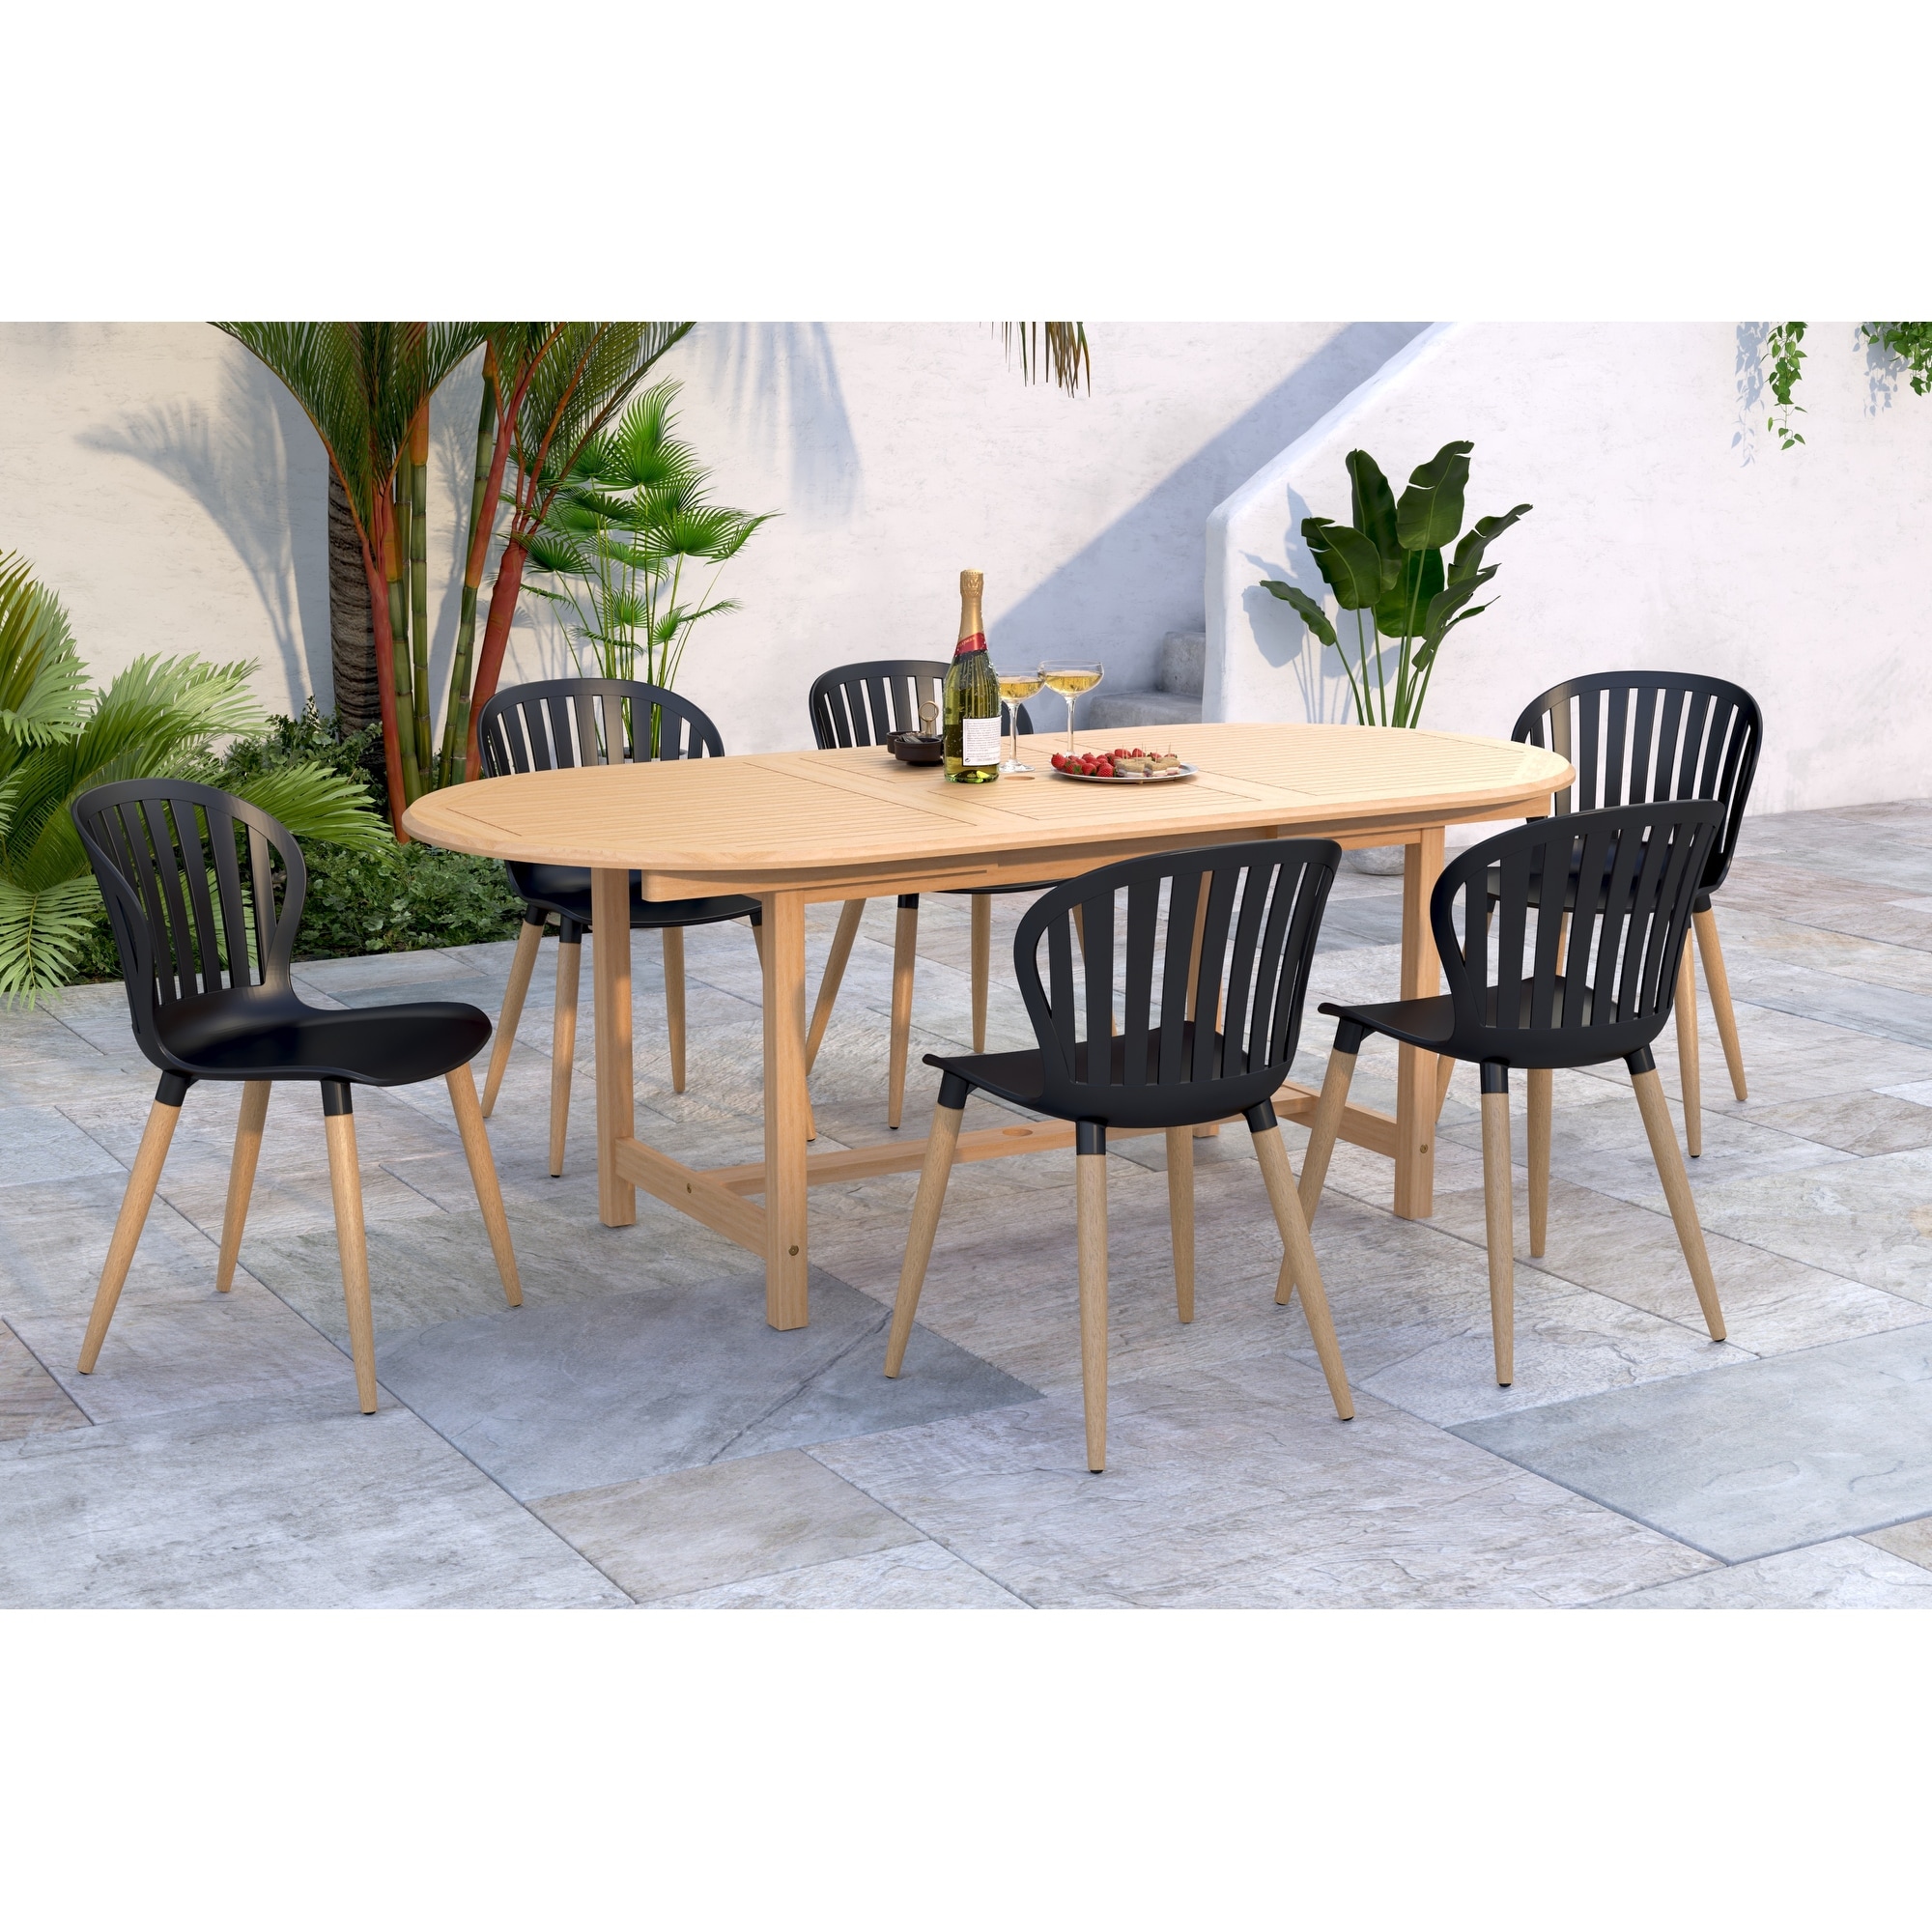 Amazonia Leblle 7pc Fsc Certified Wood Outdoor Patio Dining Set